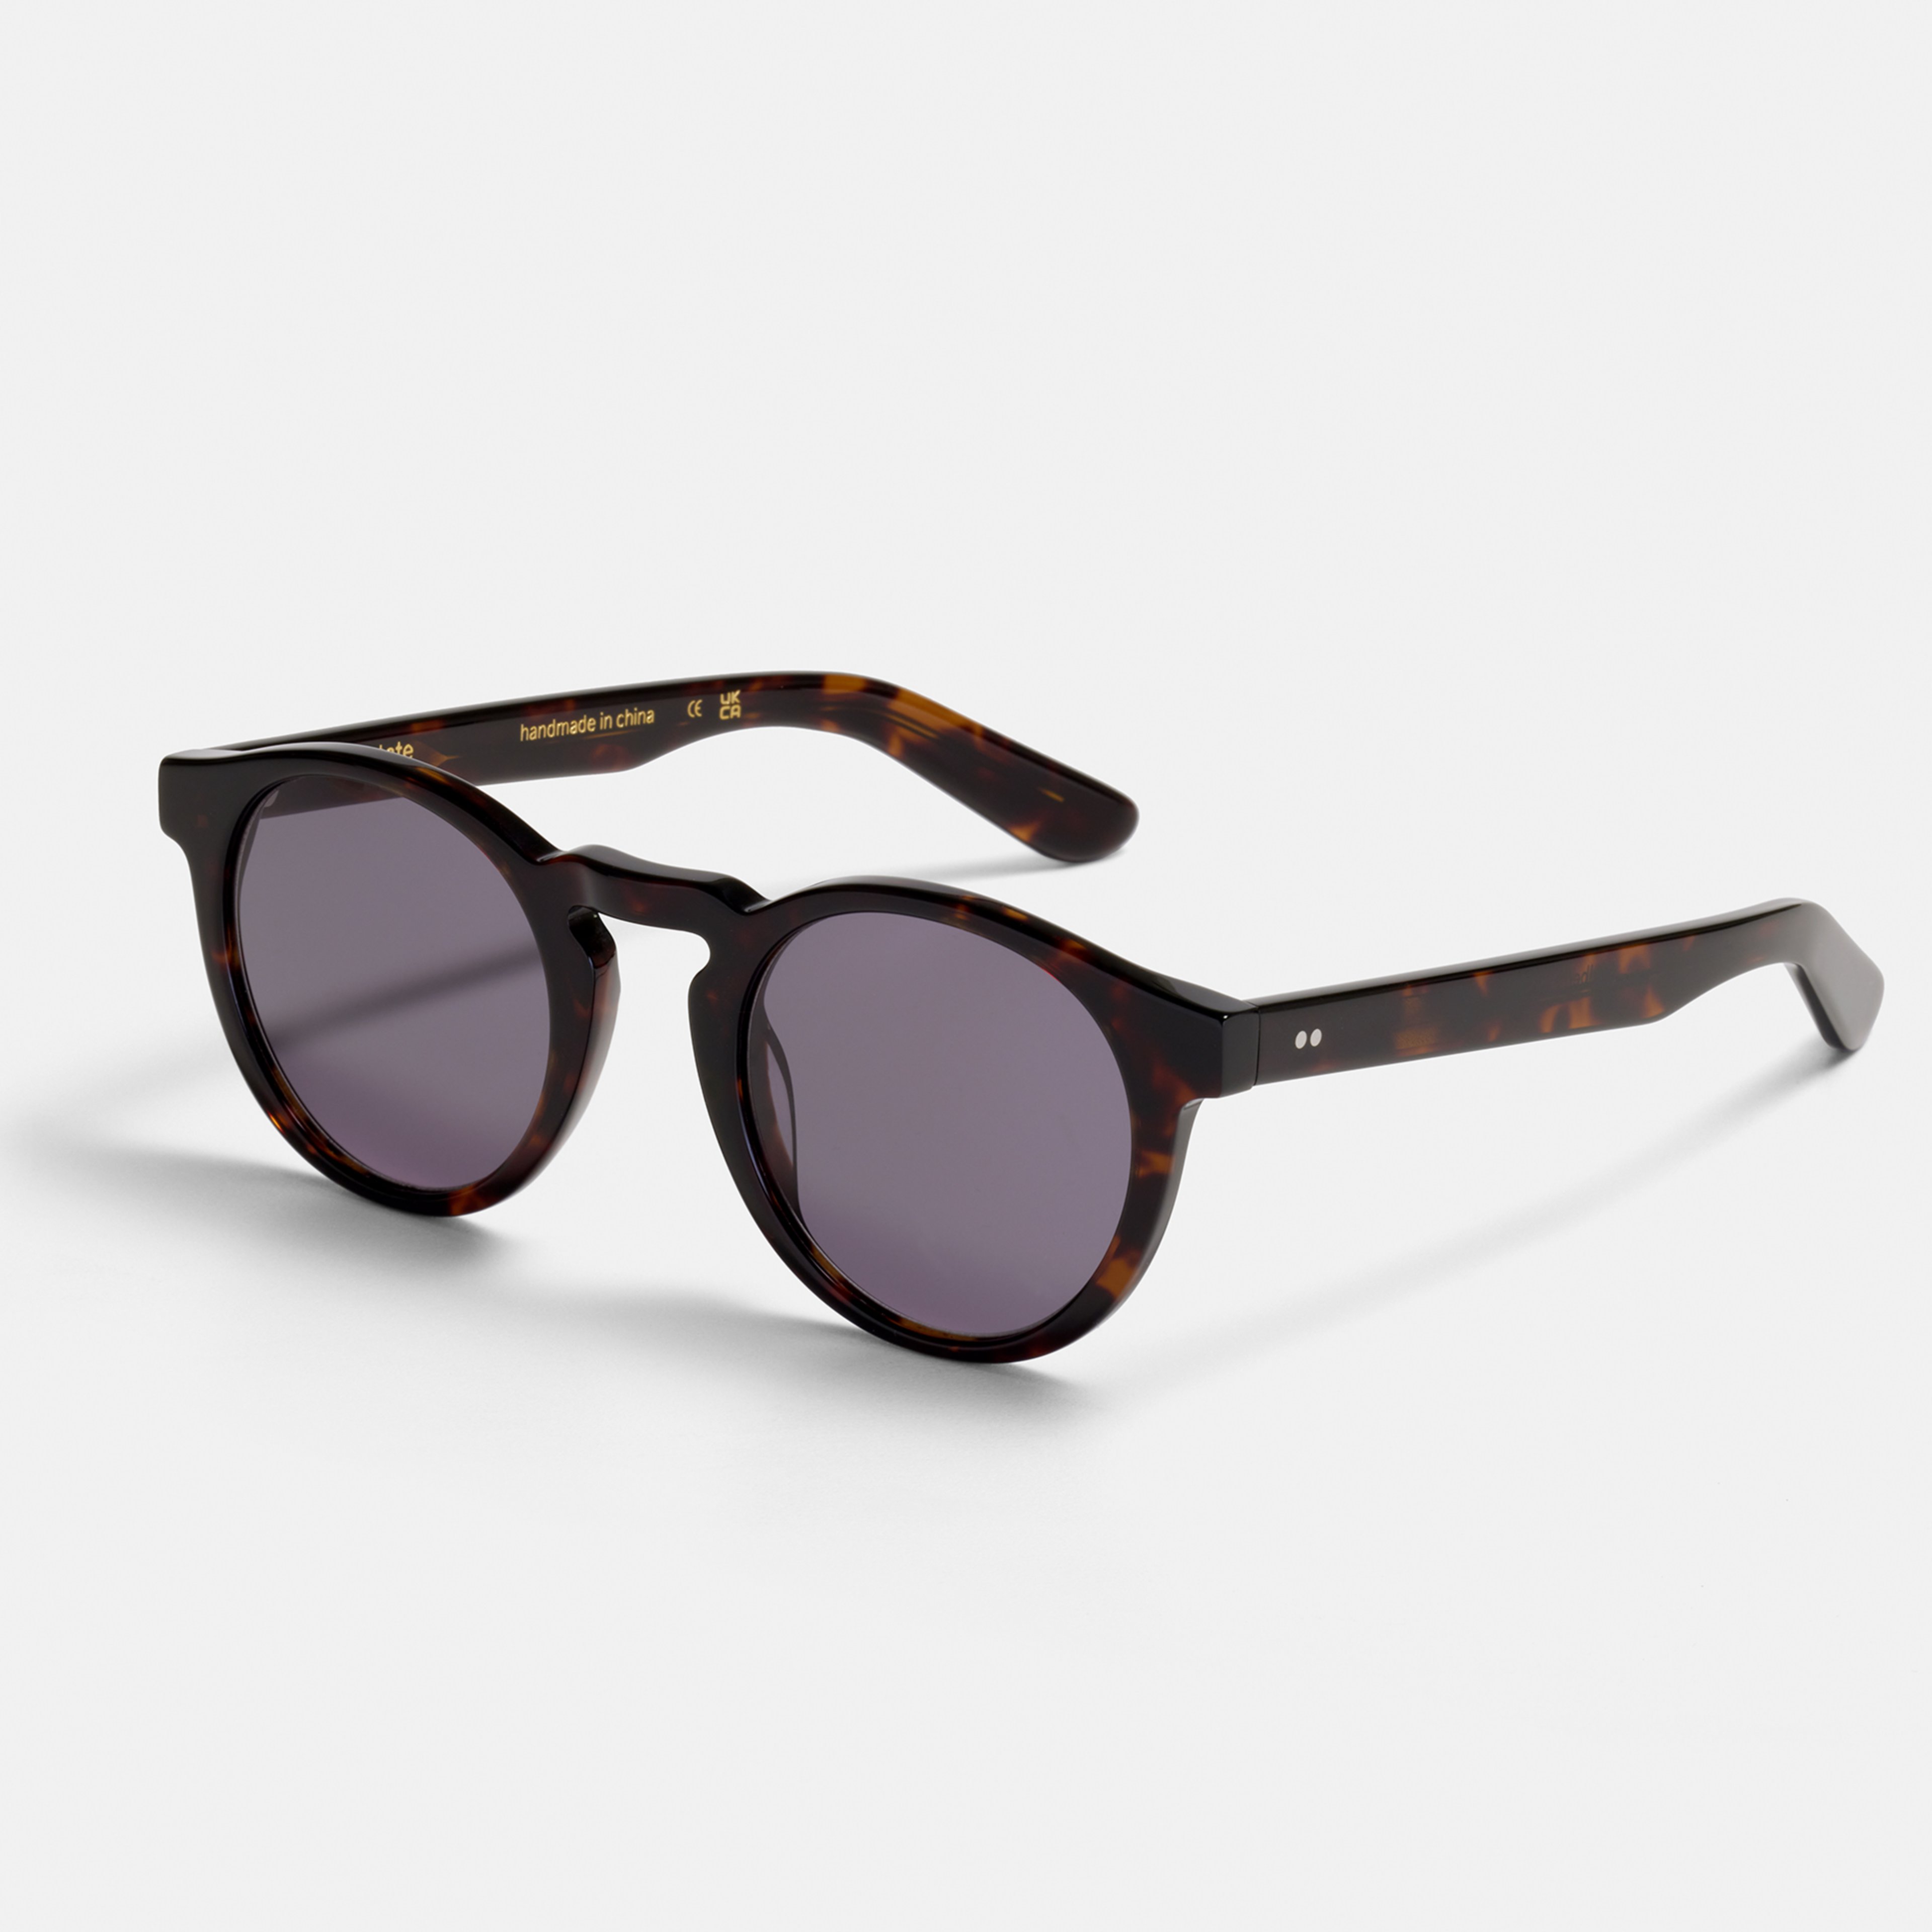 Ace & Tate Solaires | ronde Bio-acétate in tortoise